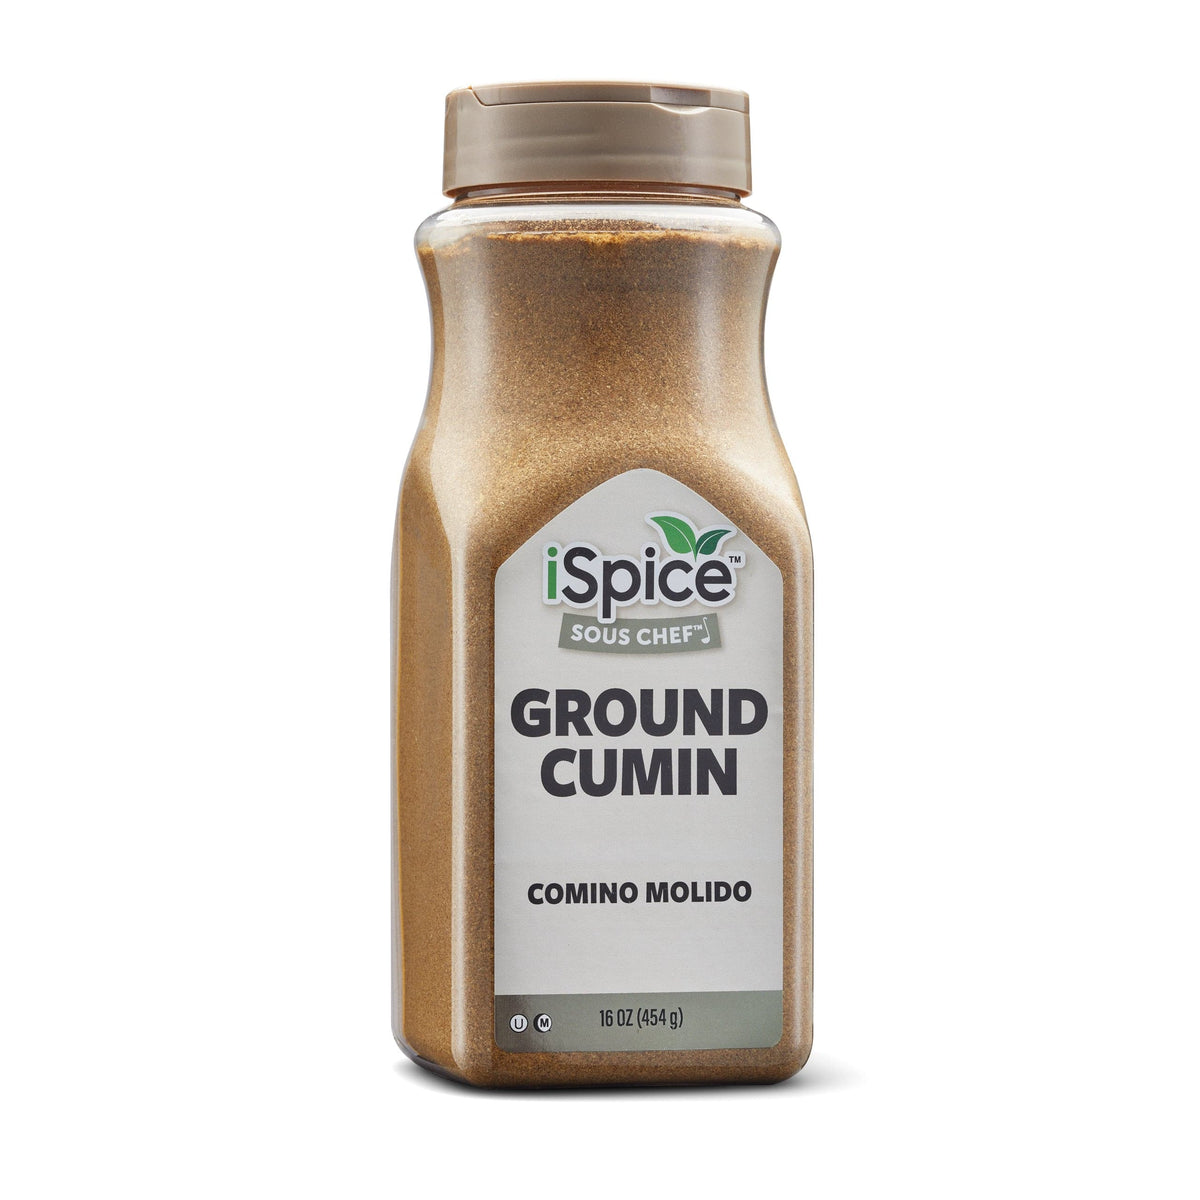 Cooking With Cumin - Ideas for Recipes